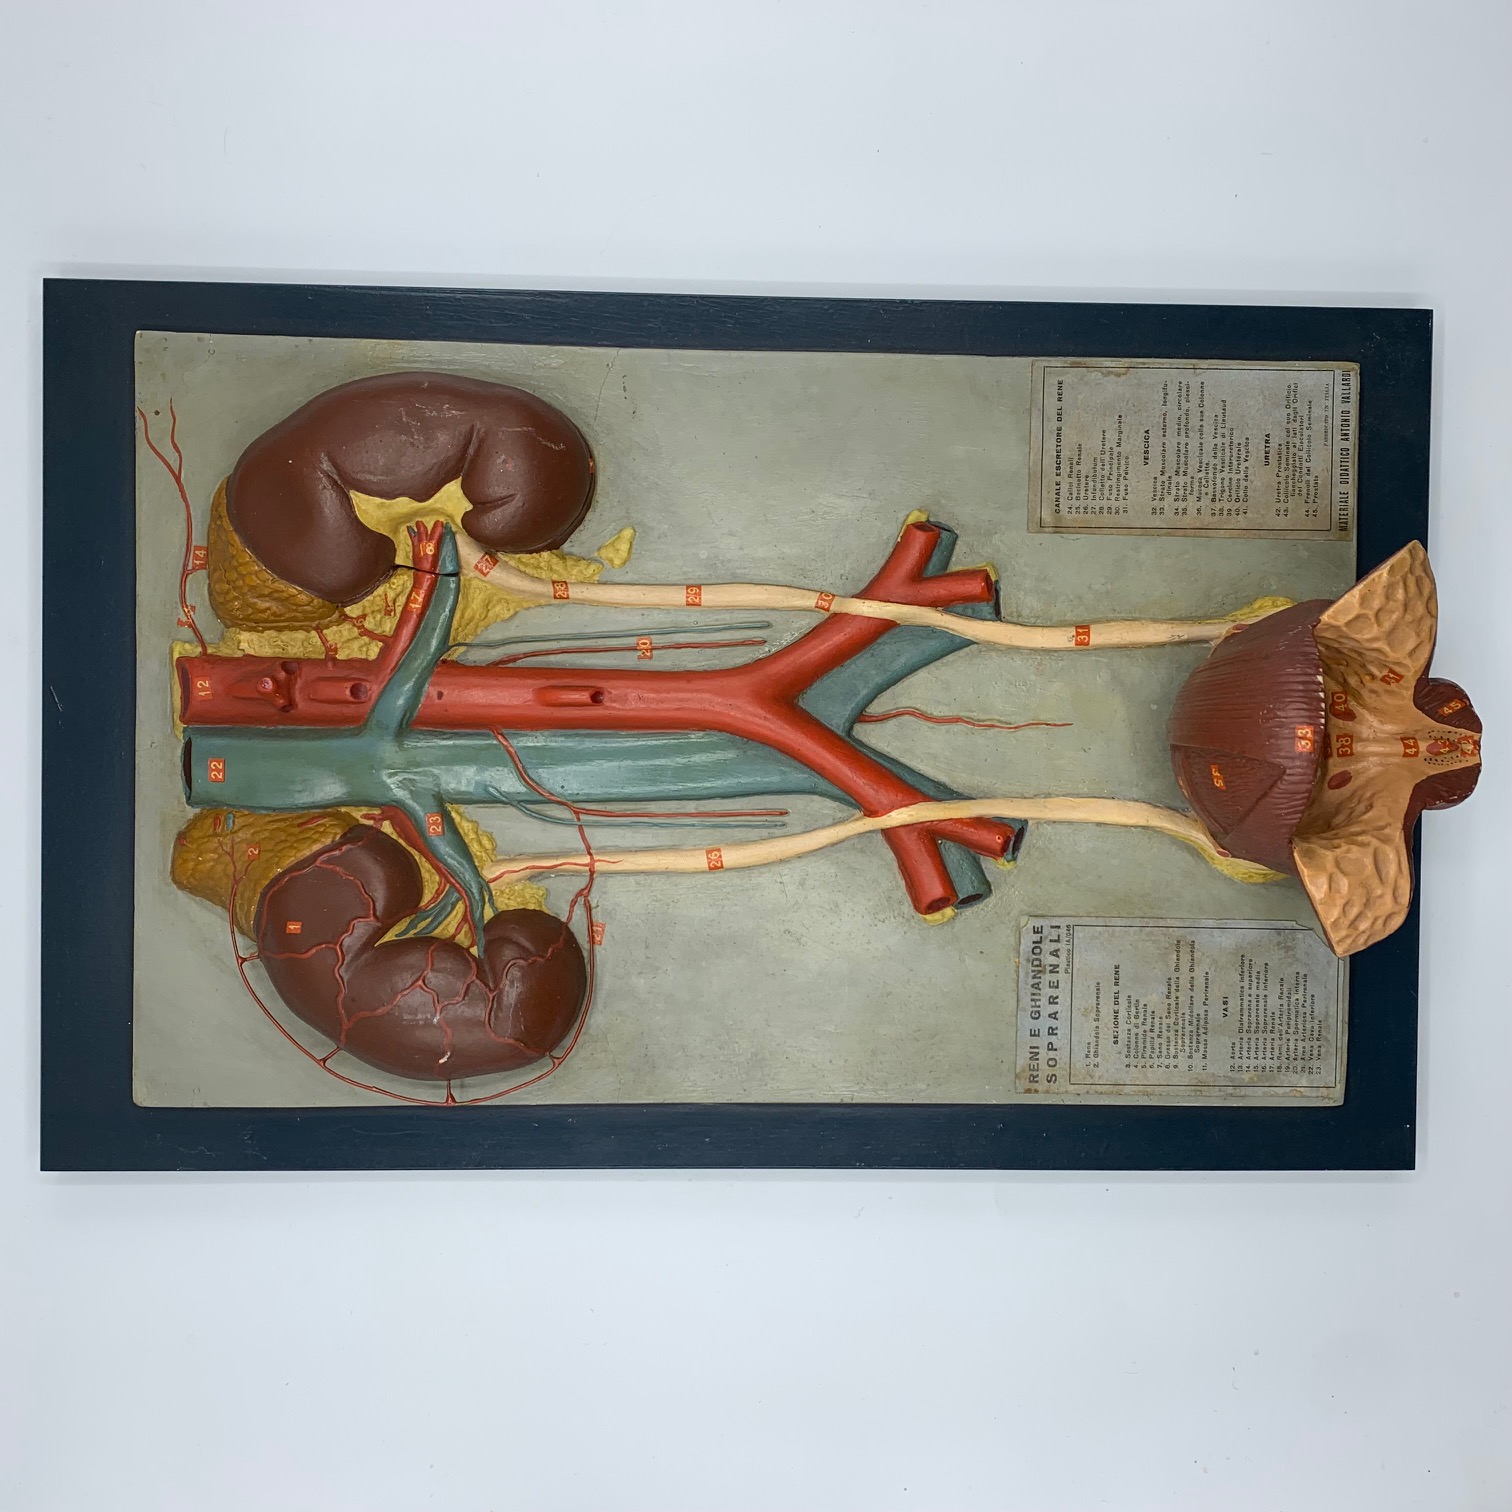 Italian anatomical model of the urinary system, ca. 1930’s